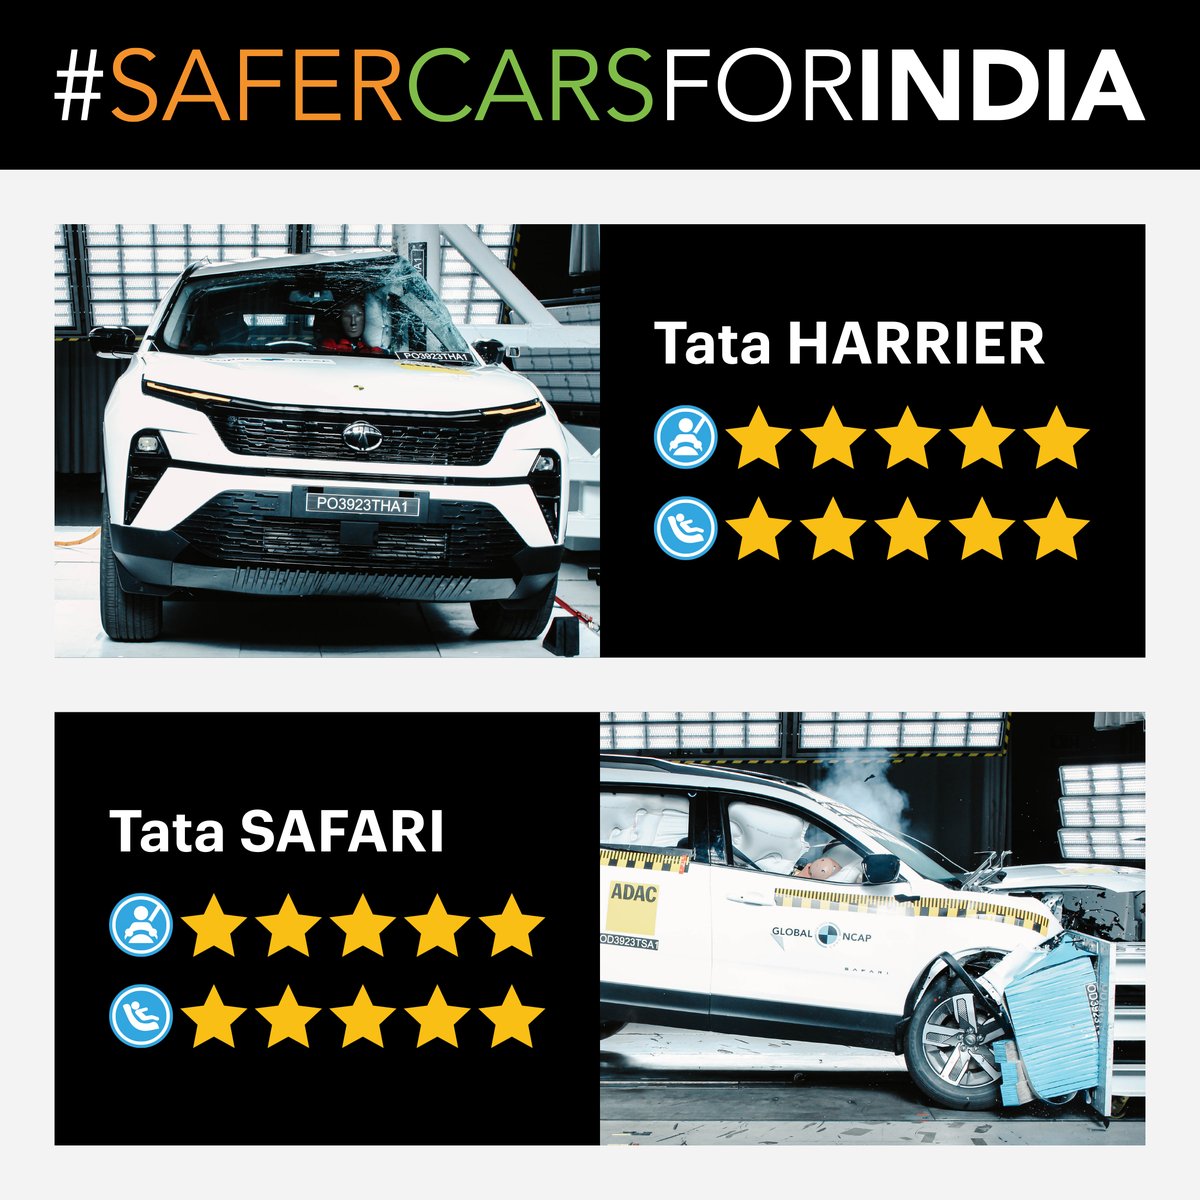 Tata delivers five star twins. The @TataMotors Safari and Harrier have achieved the highest Global NCAP score for adult and child occupant safety in our #SaferCarsForIndia testing to date. Read the full story here: bit.ly/45yB87l #50by30